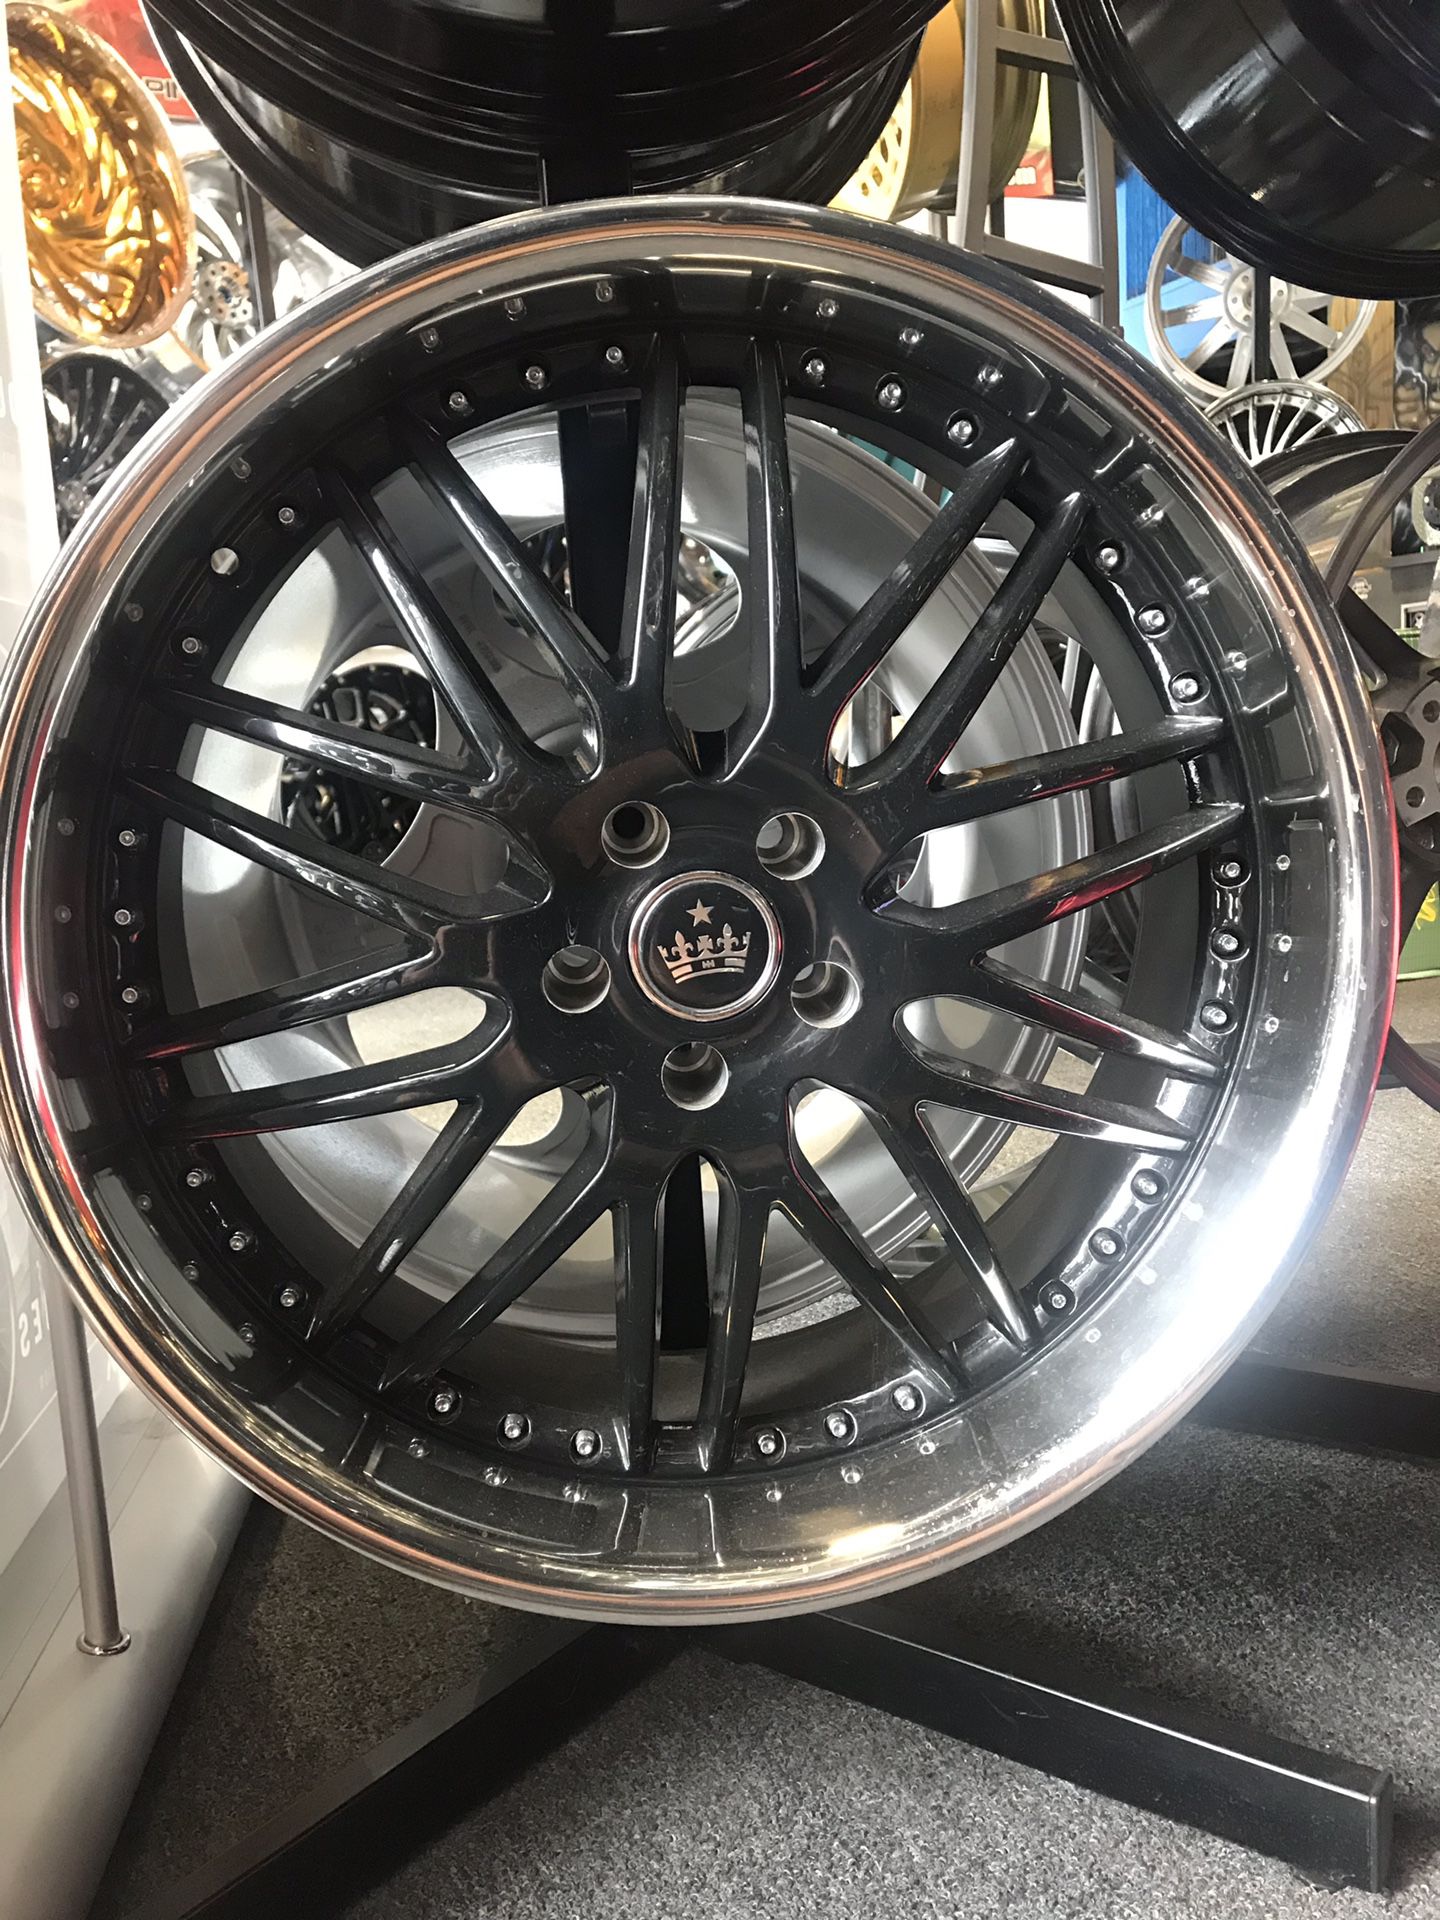 22” Staggered Knight Mesh Rims